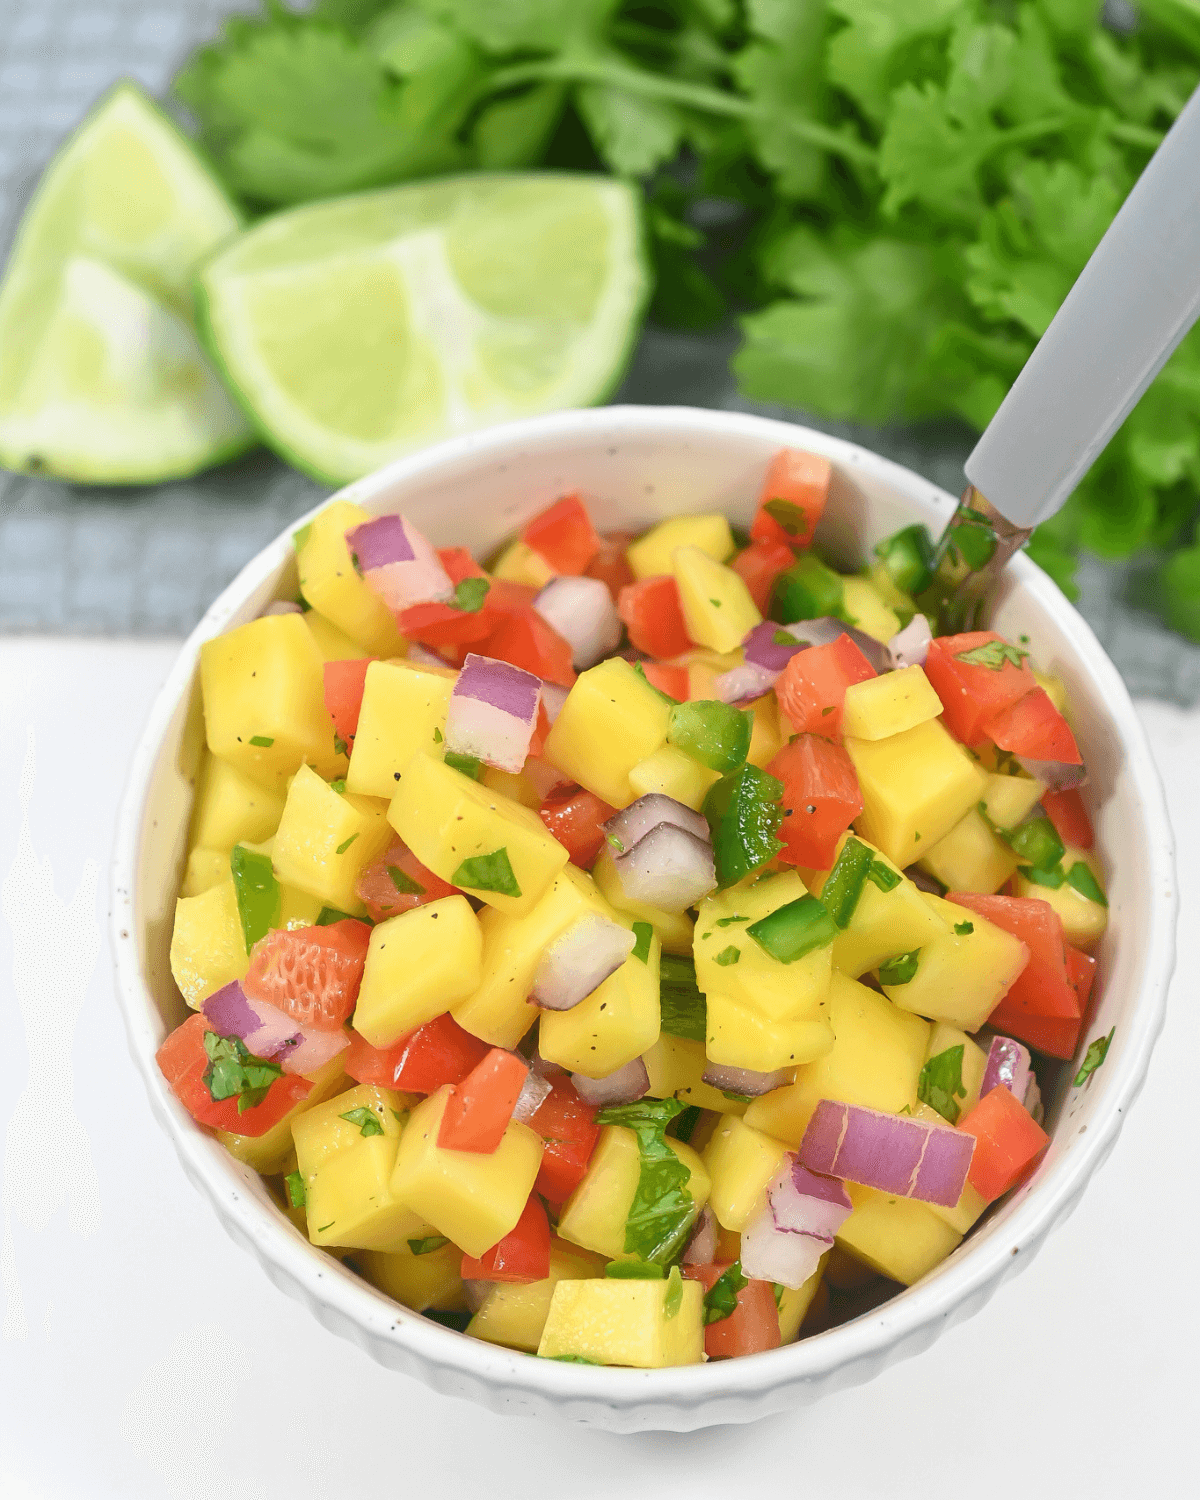 A bowl of mango habanero salsa garnished with lime and cilantro.